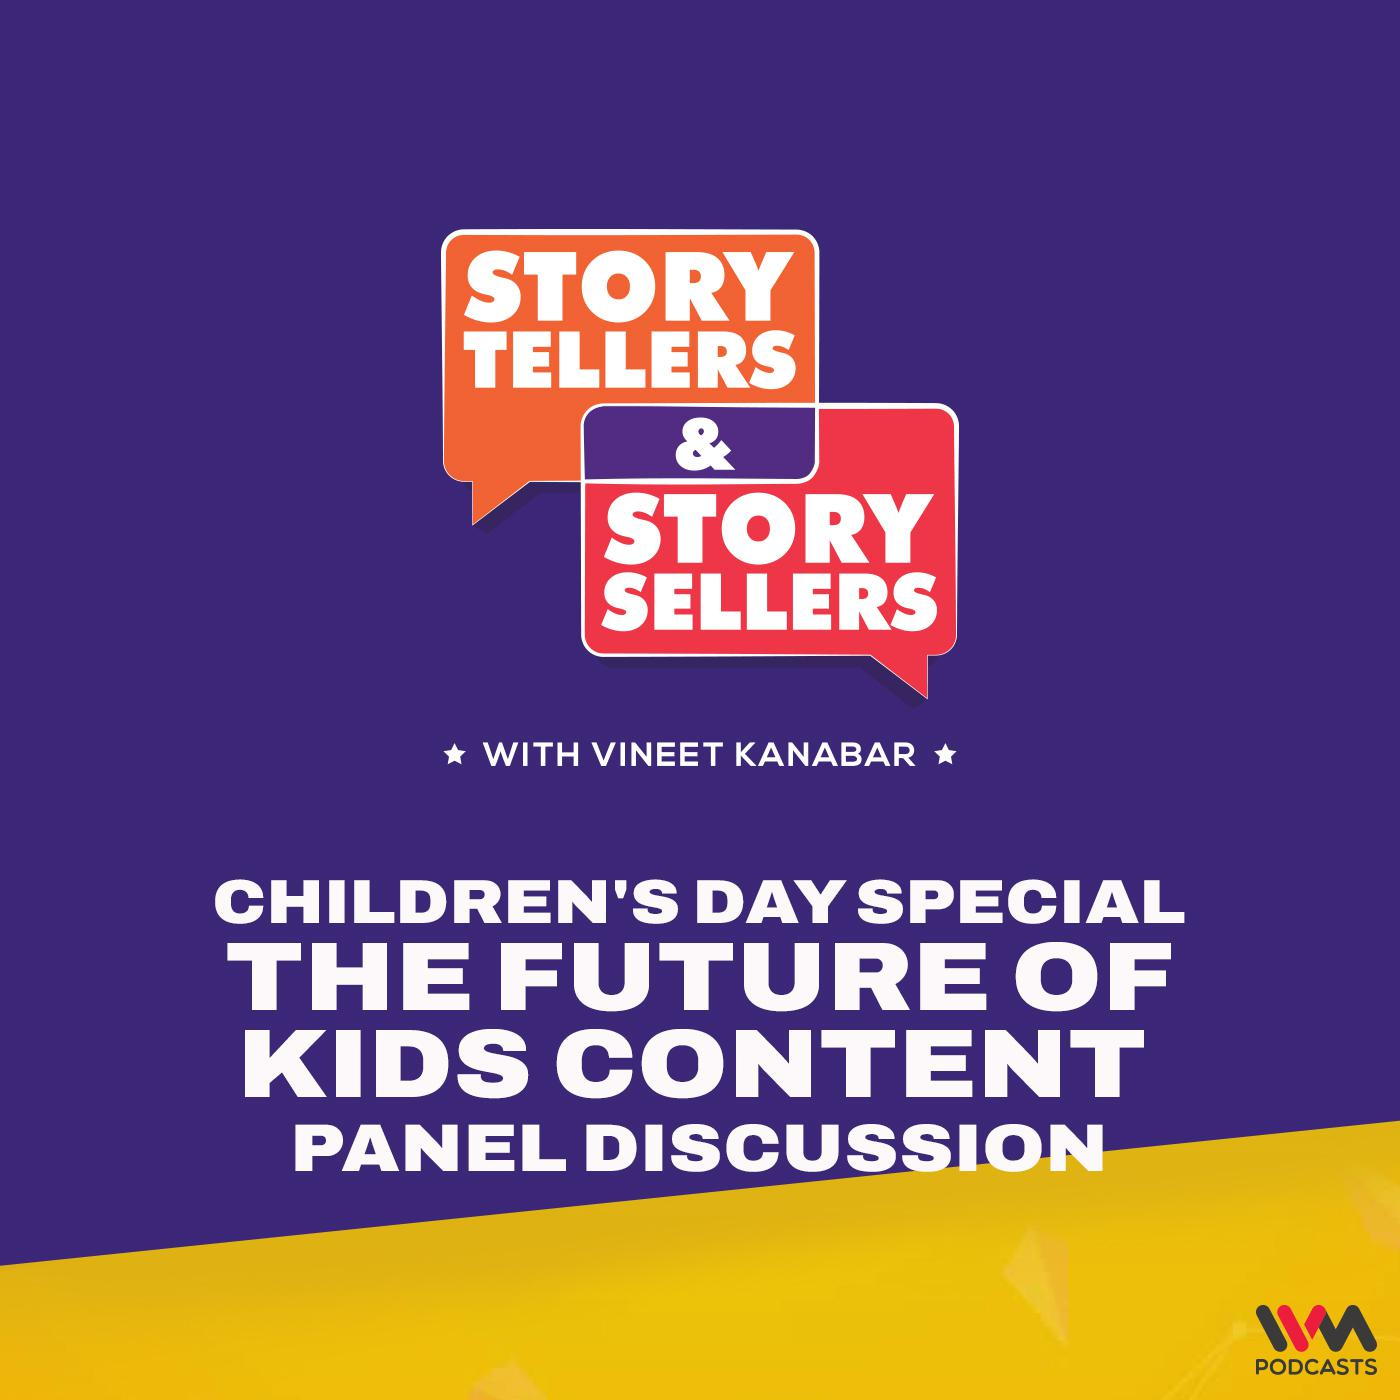 Children's Day Special: The Future of Kids Content | Panel Discussion